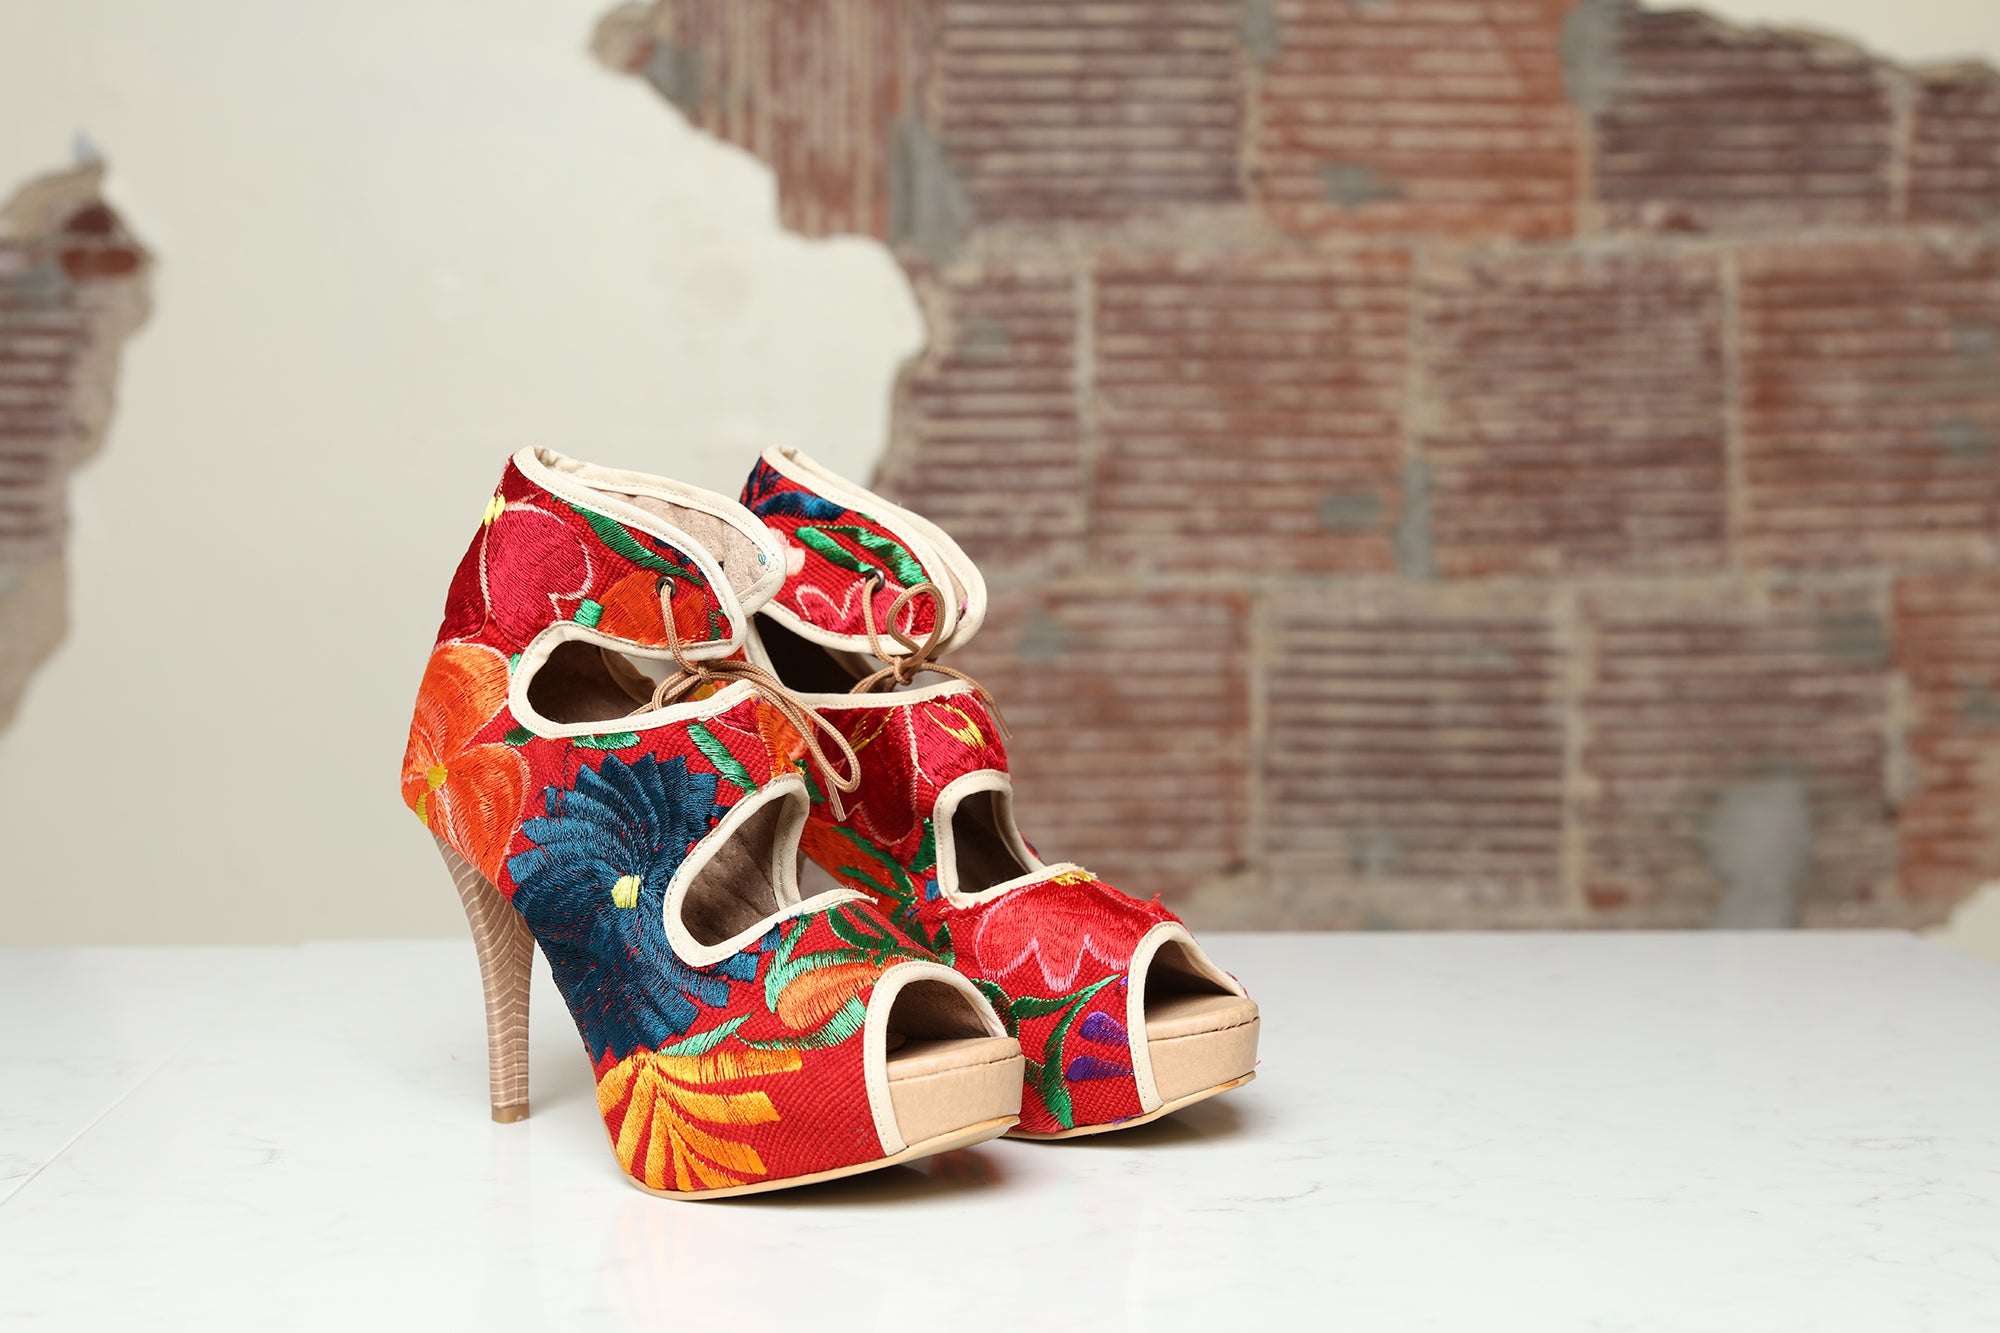 High heels with blue, red, blue and yellow floral embroidery